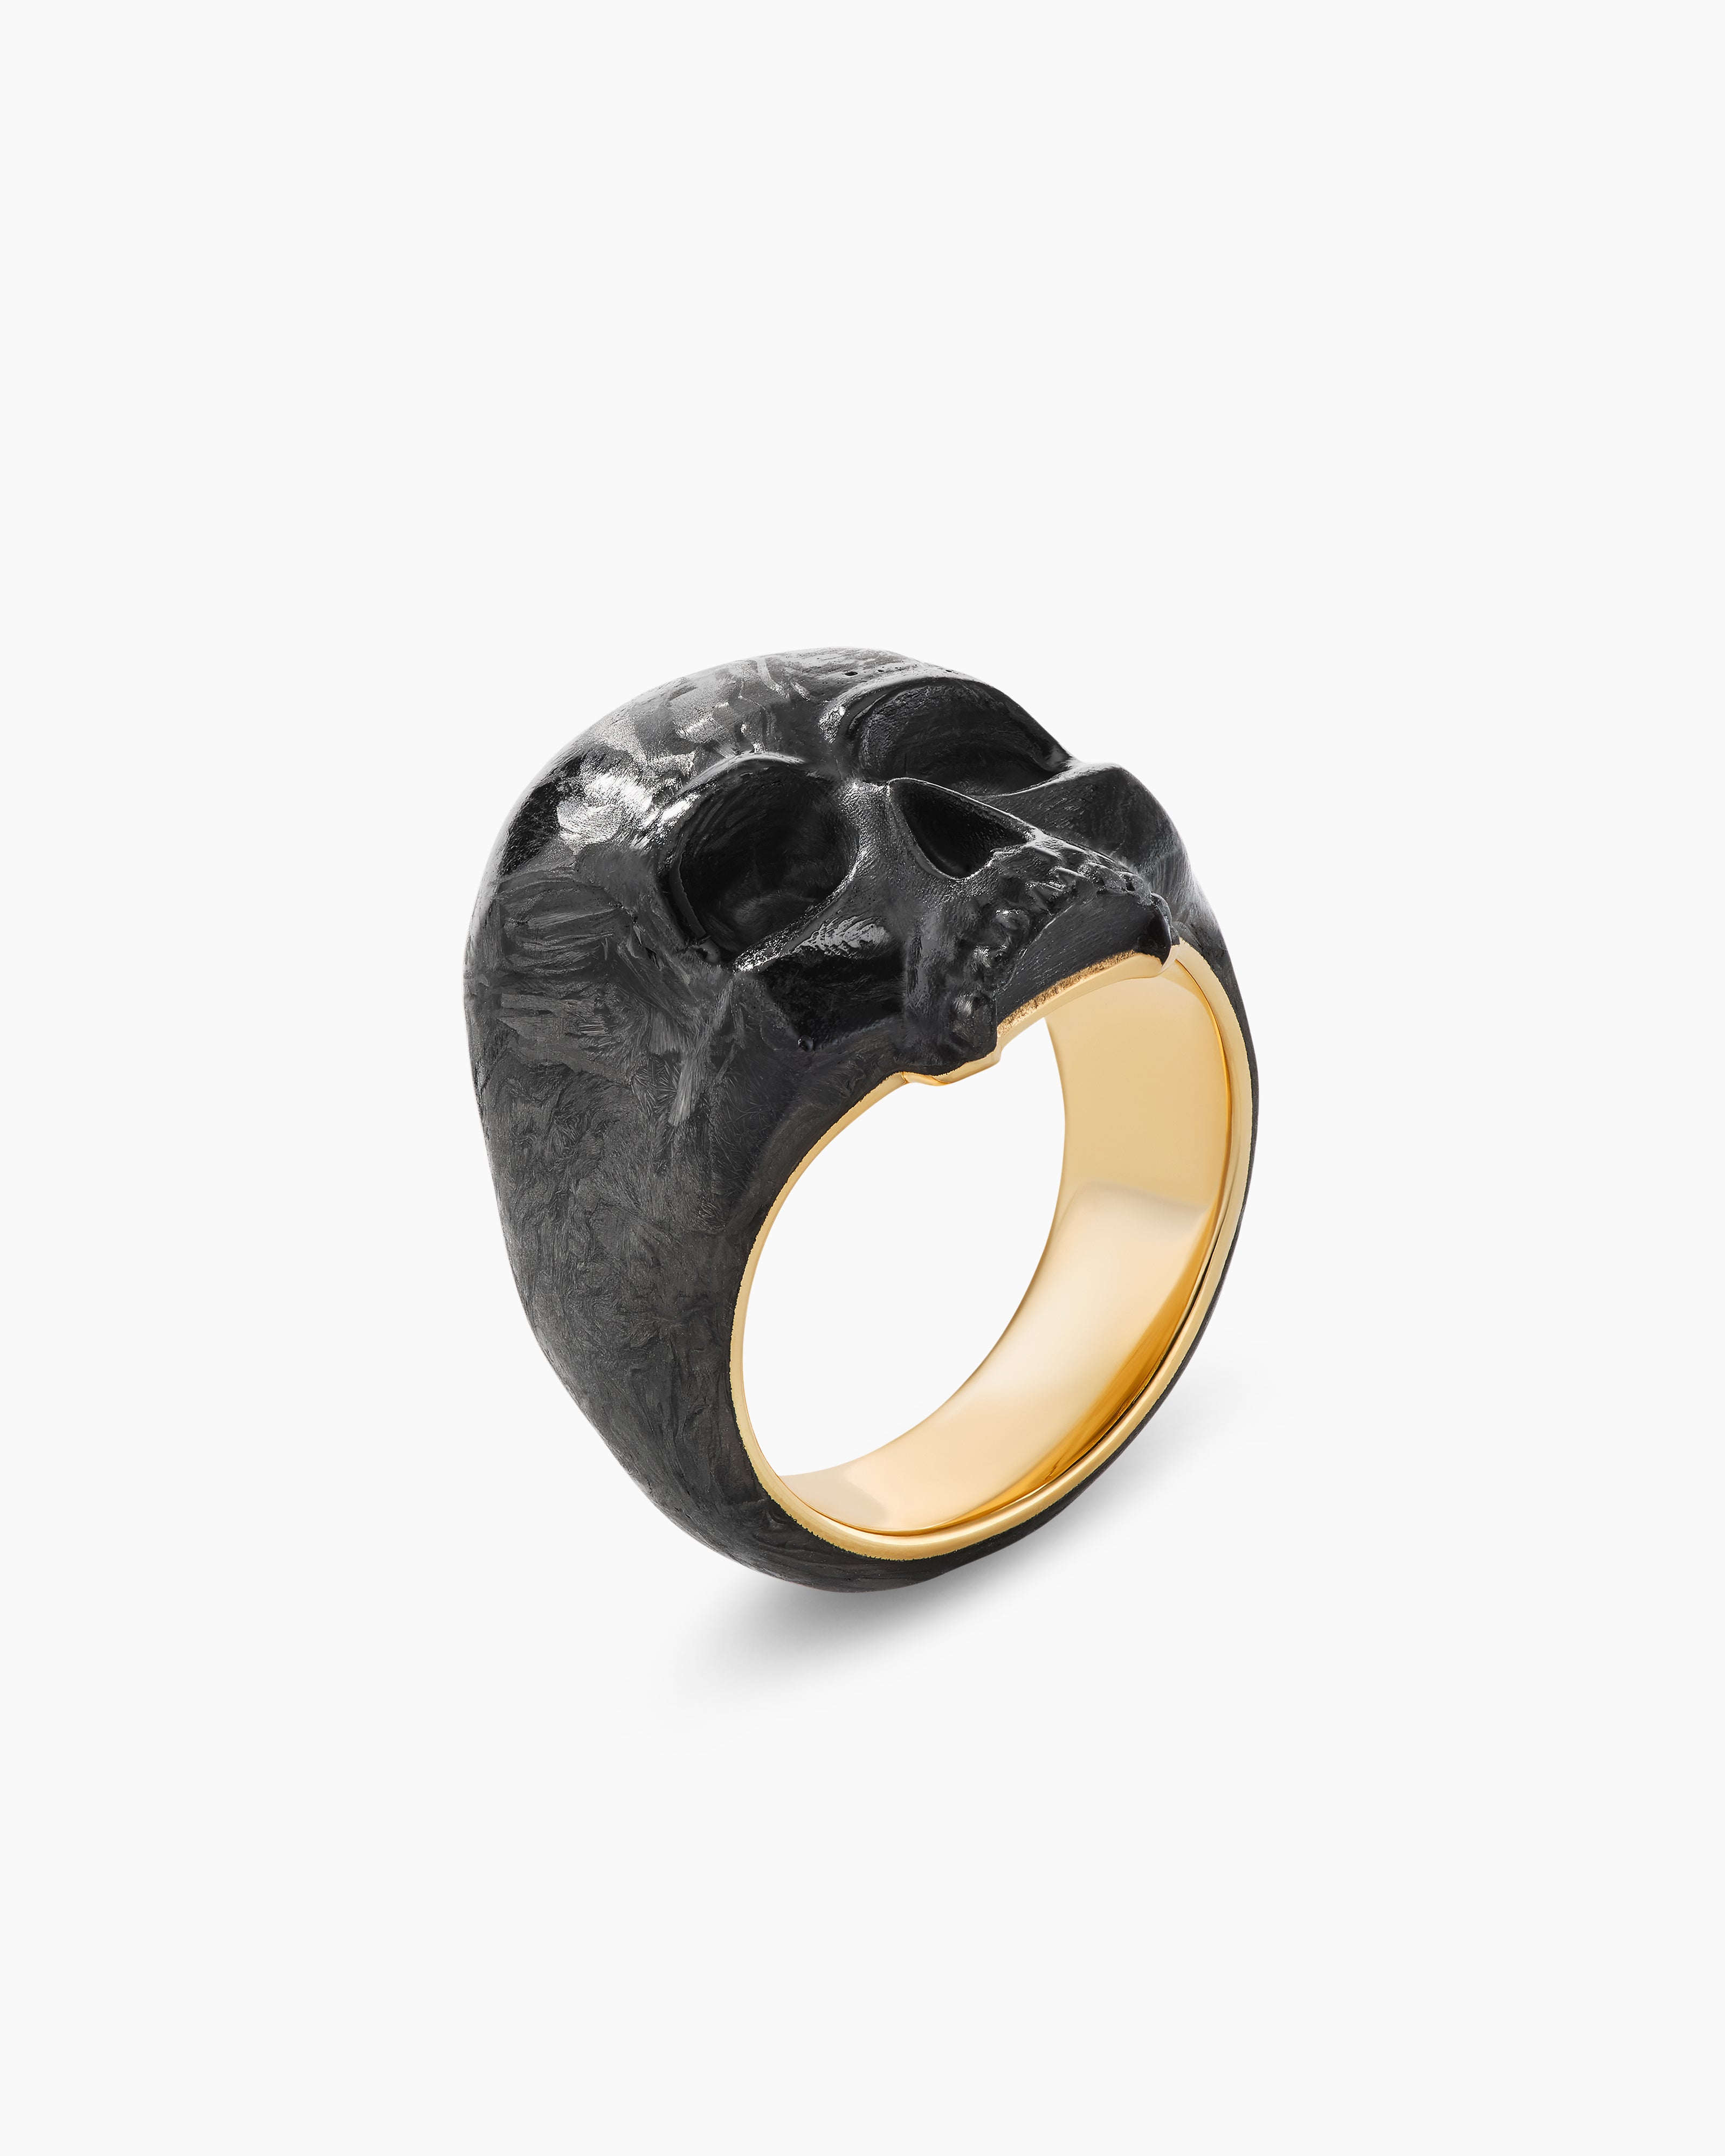 Memento Mori Signet Ring, Gothic Scull Jewelry, Occult Heavy Amor Fati Sun  and Moon, Handmade Heavy Silver Stoic Ring - Etsy